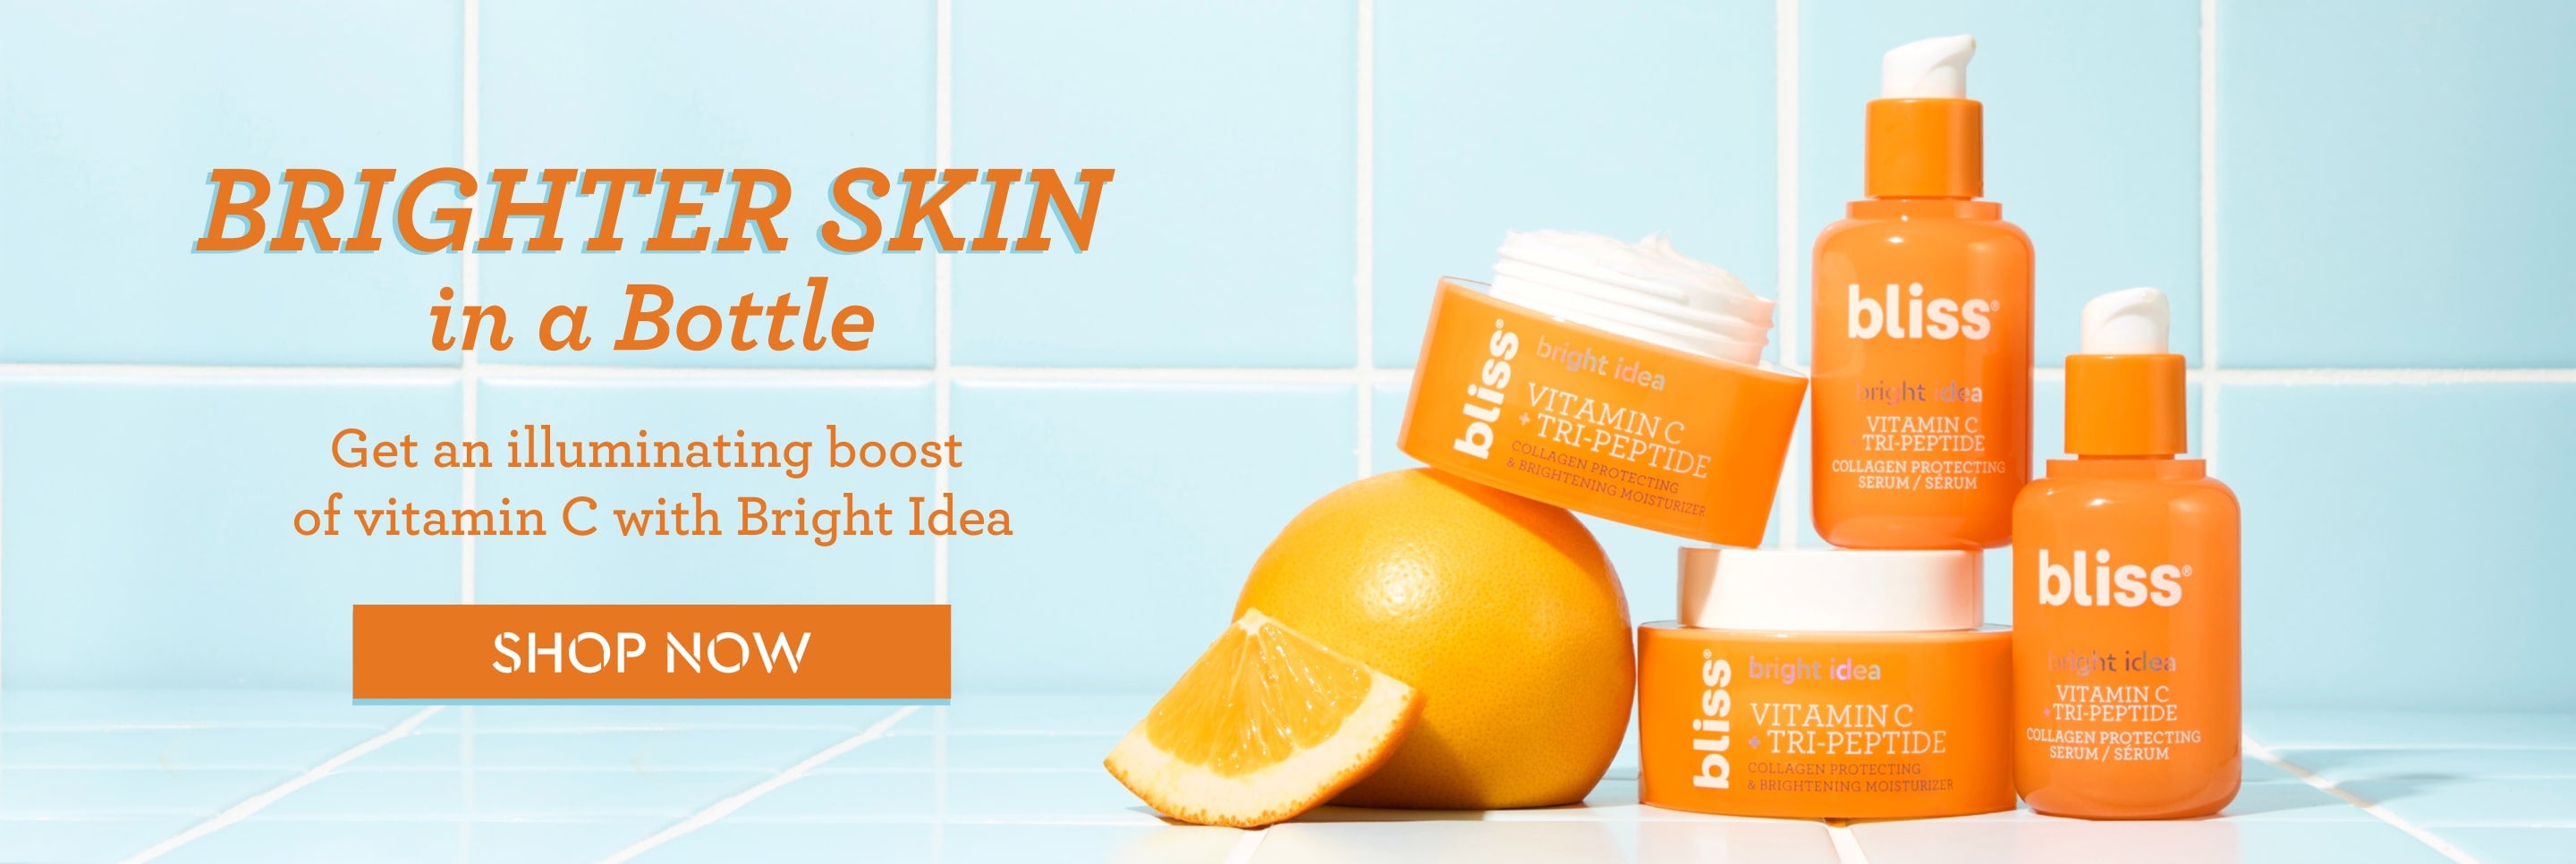 Brighter skin in a bottle. Get an illuminating boost of vitamin C with the Bright Idea collection from Bliss